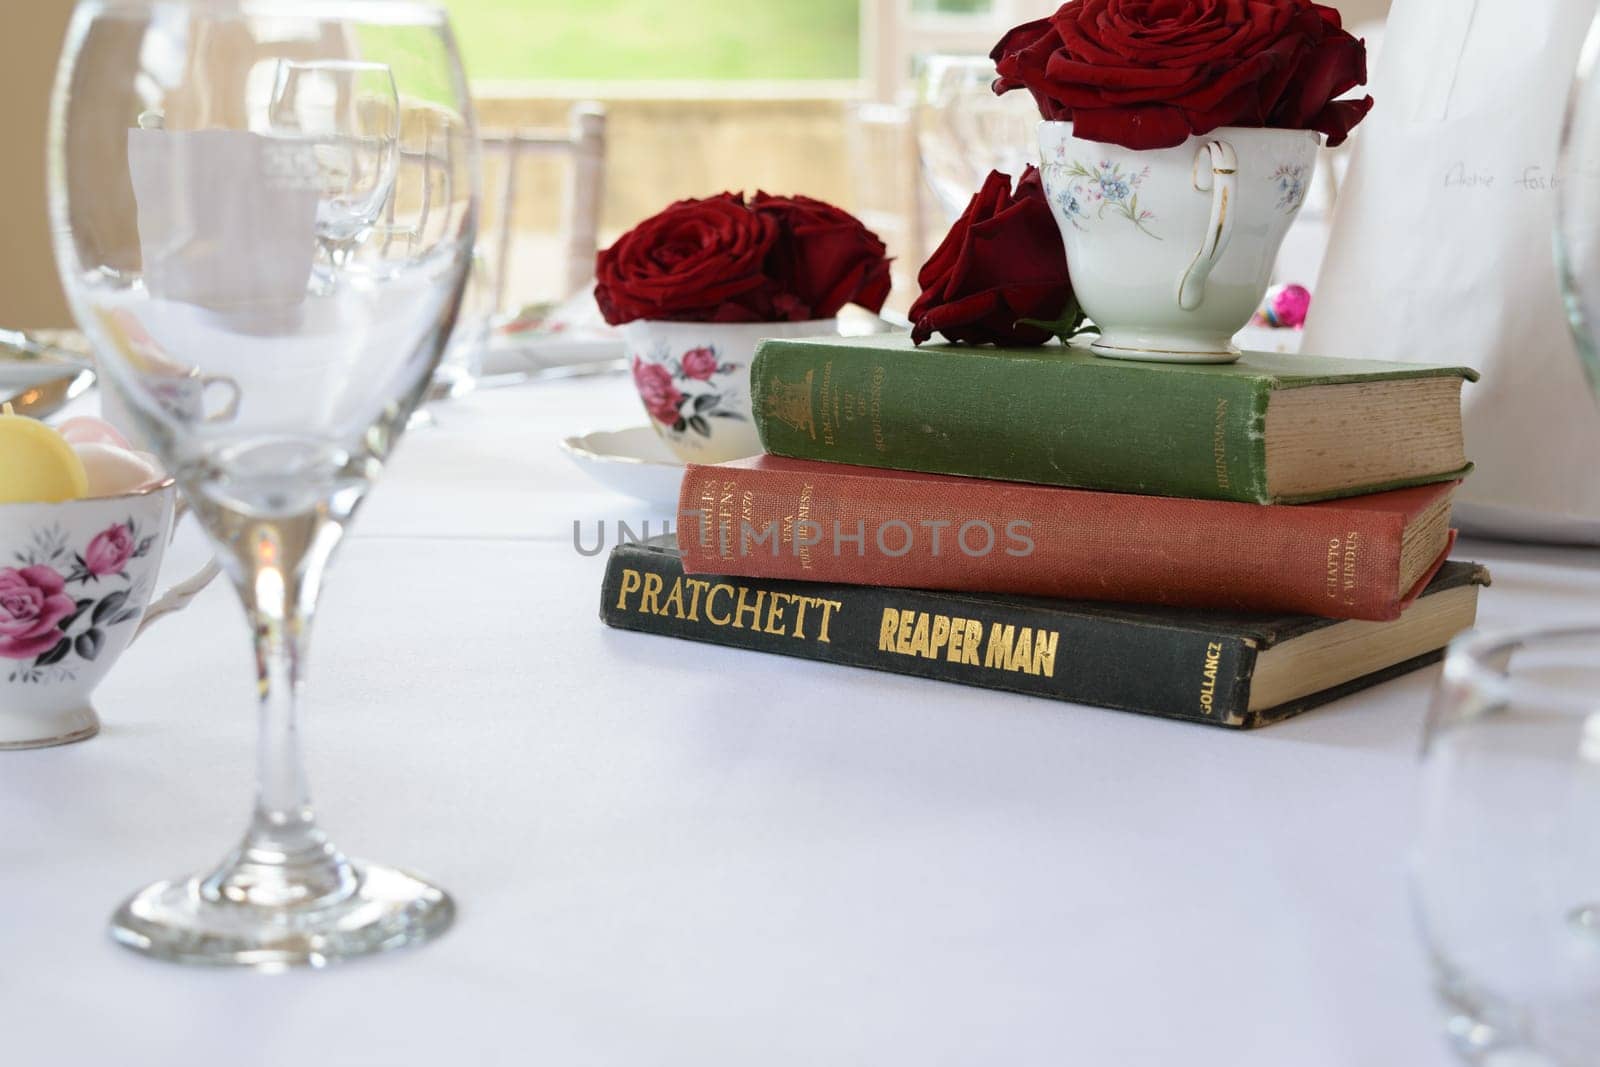 A table setting with wine glasses, teacups with red roses, and a stack of books.